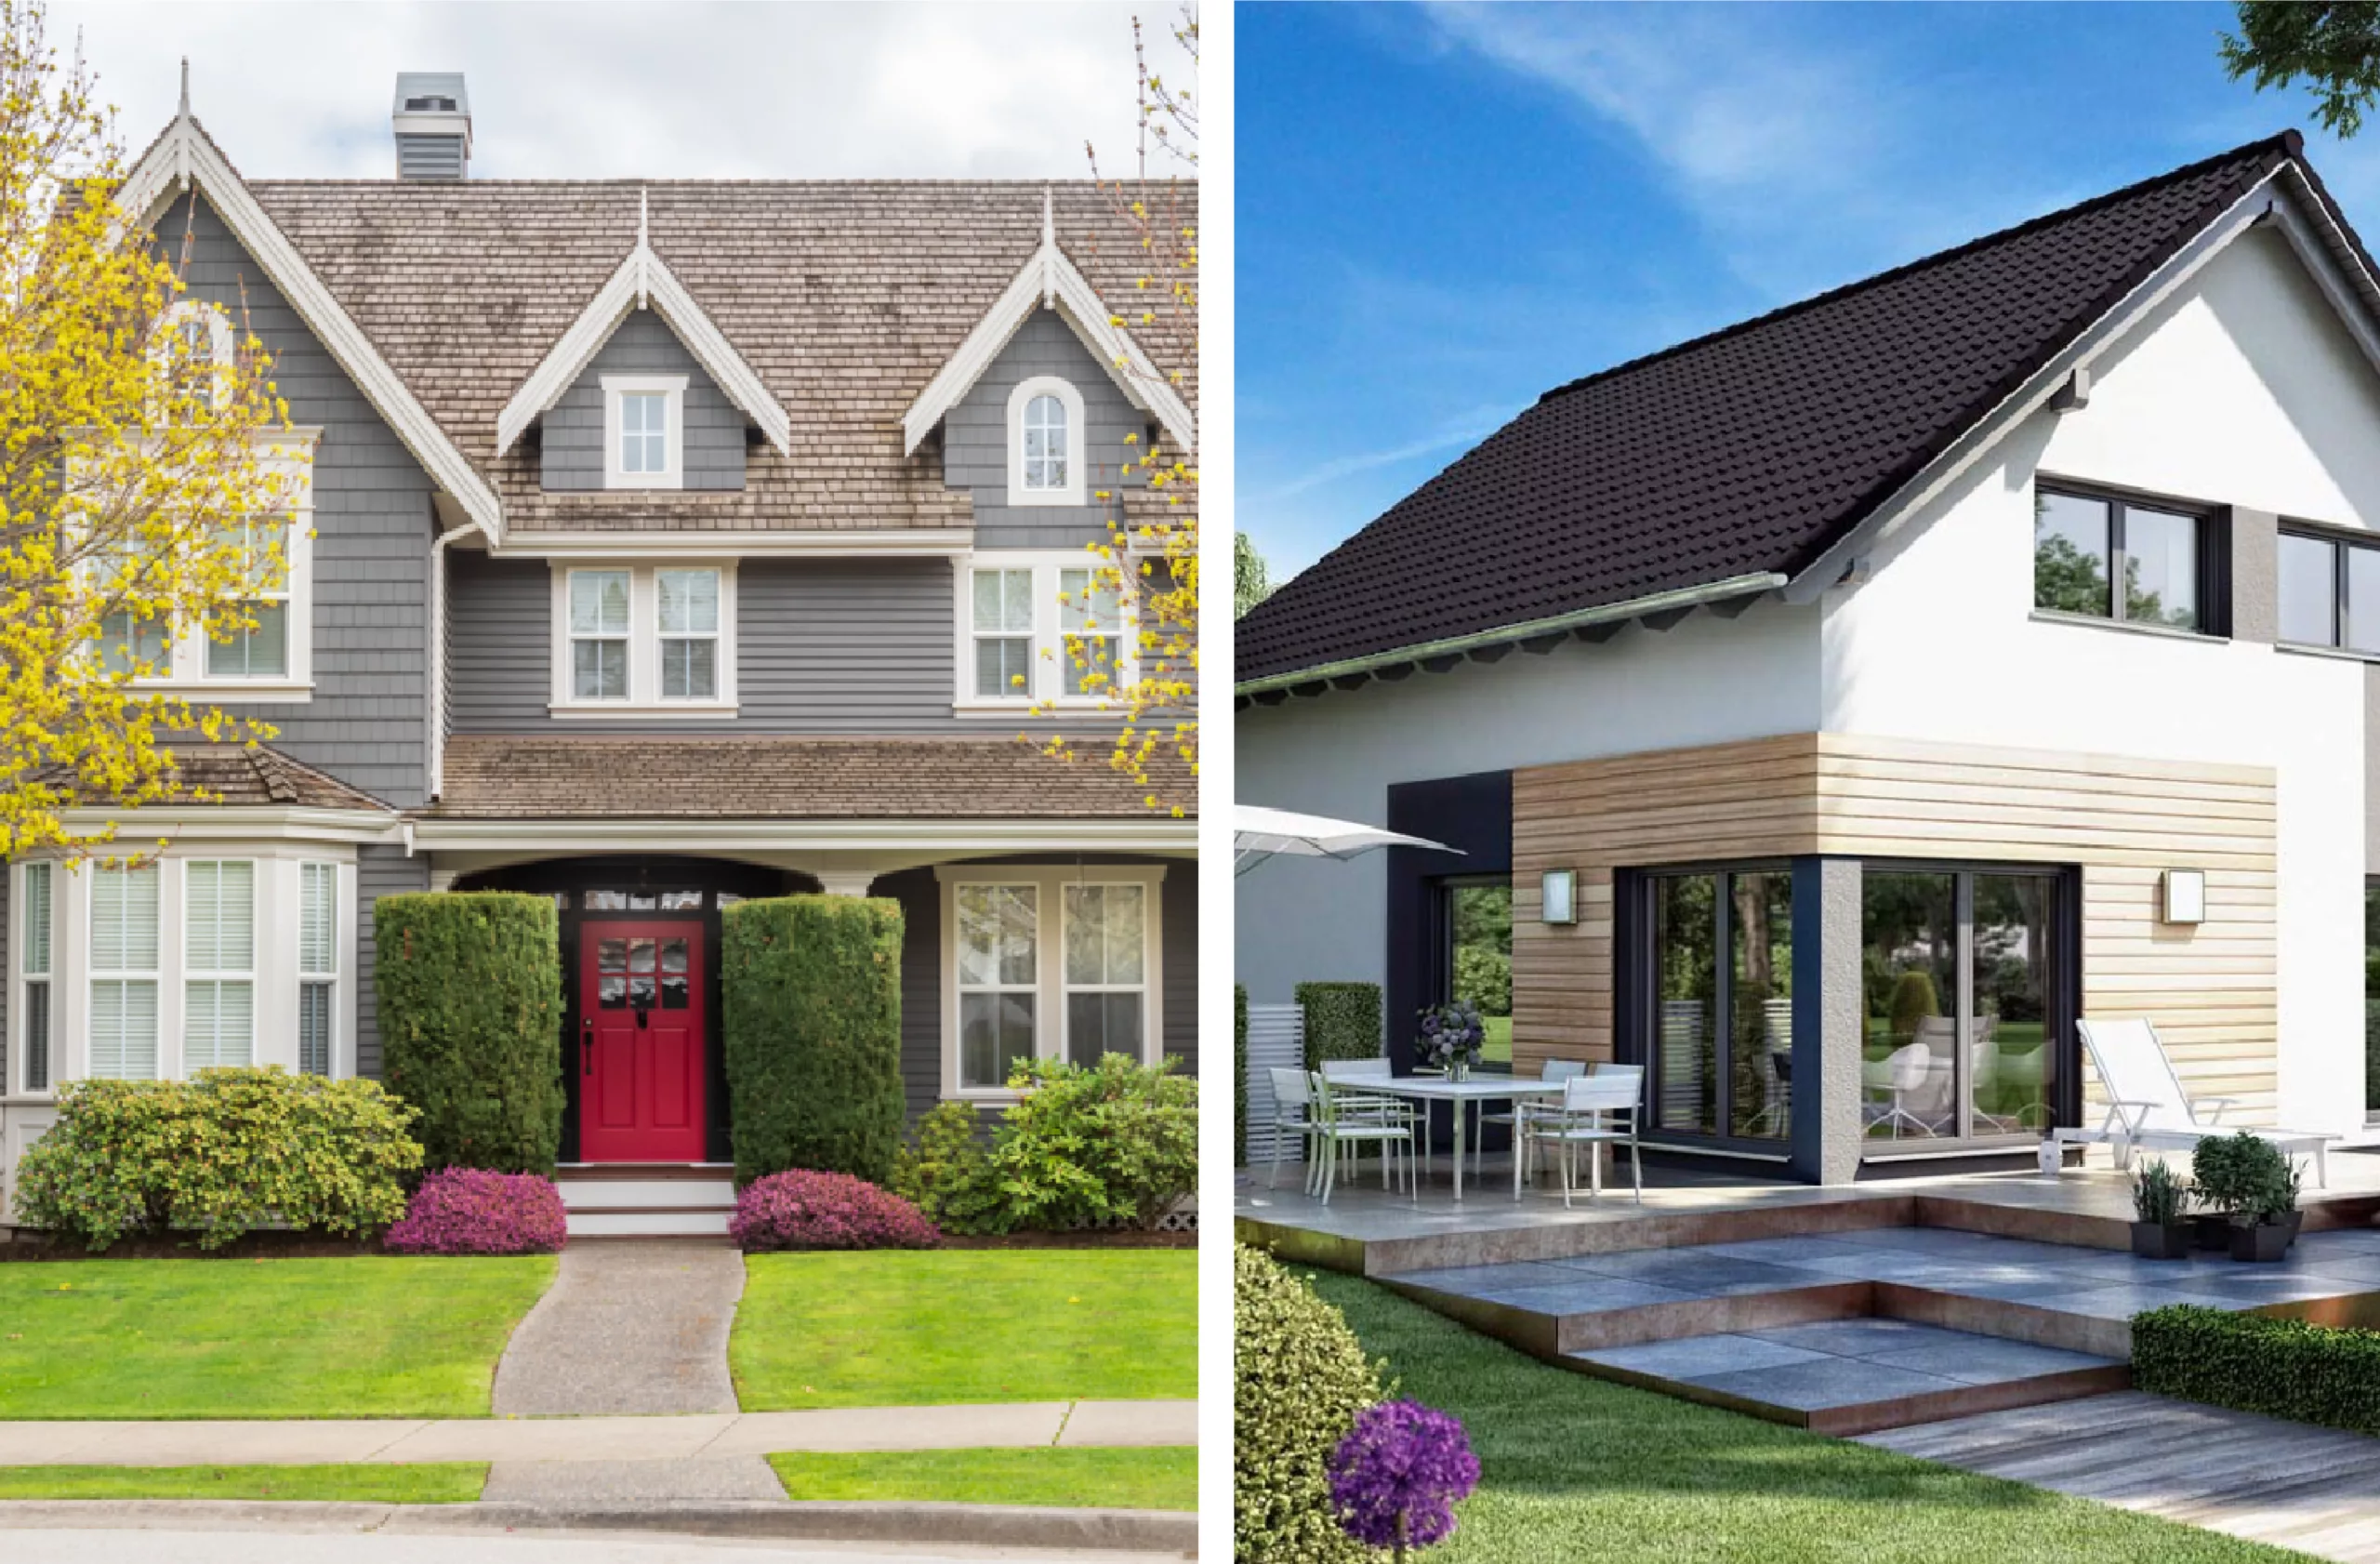 German Homes vs. American Homes - The Surprising Differences 